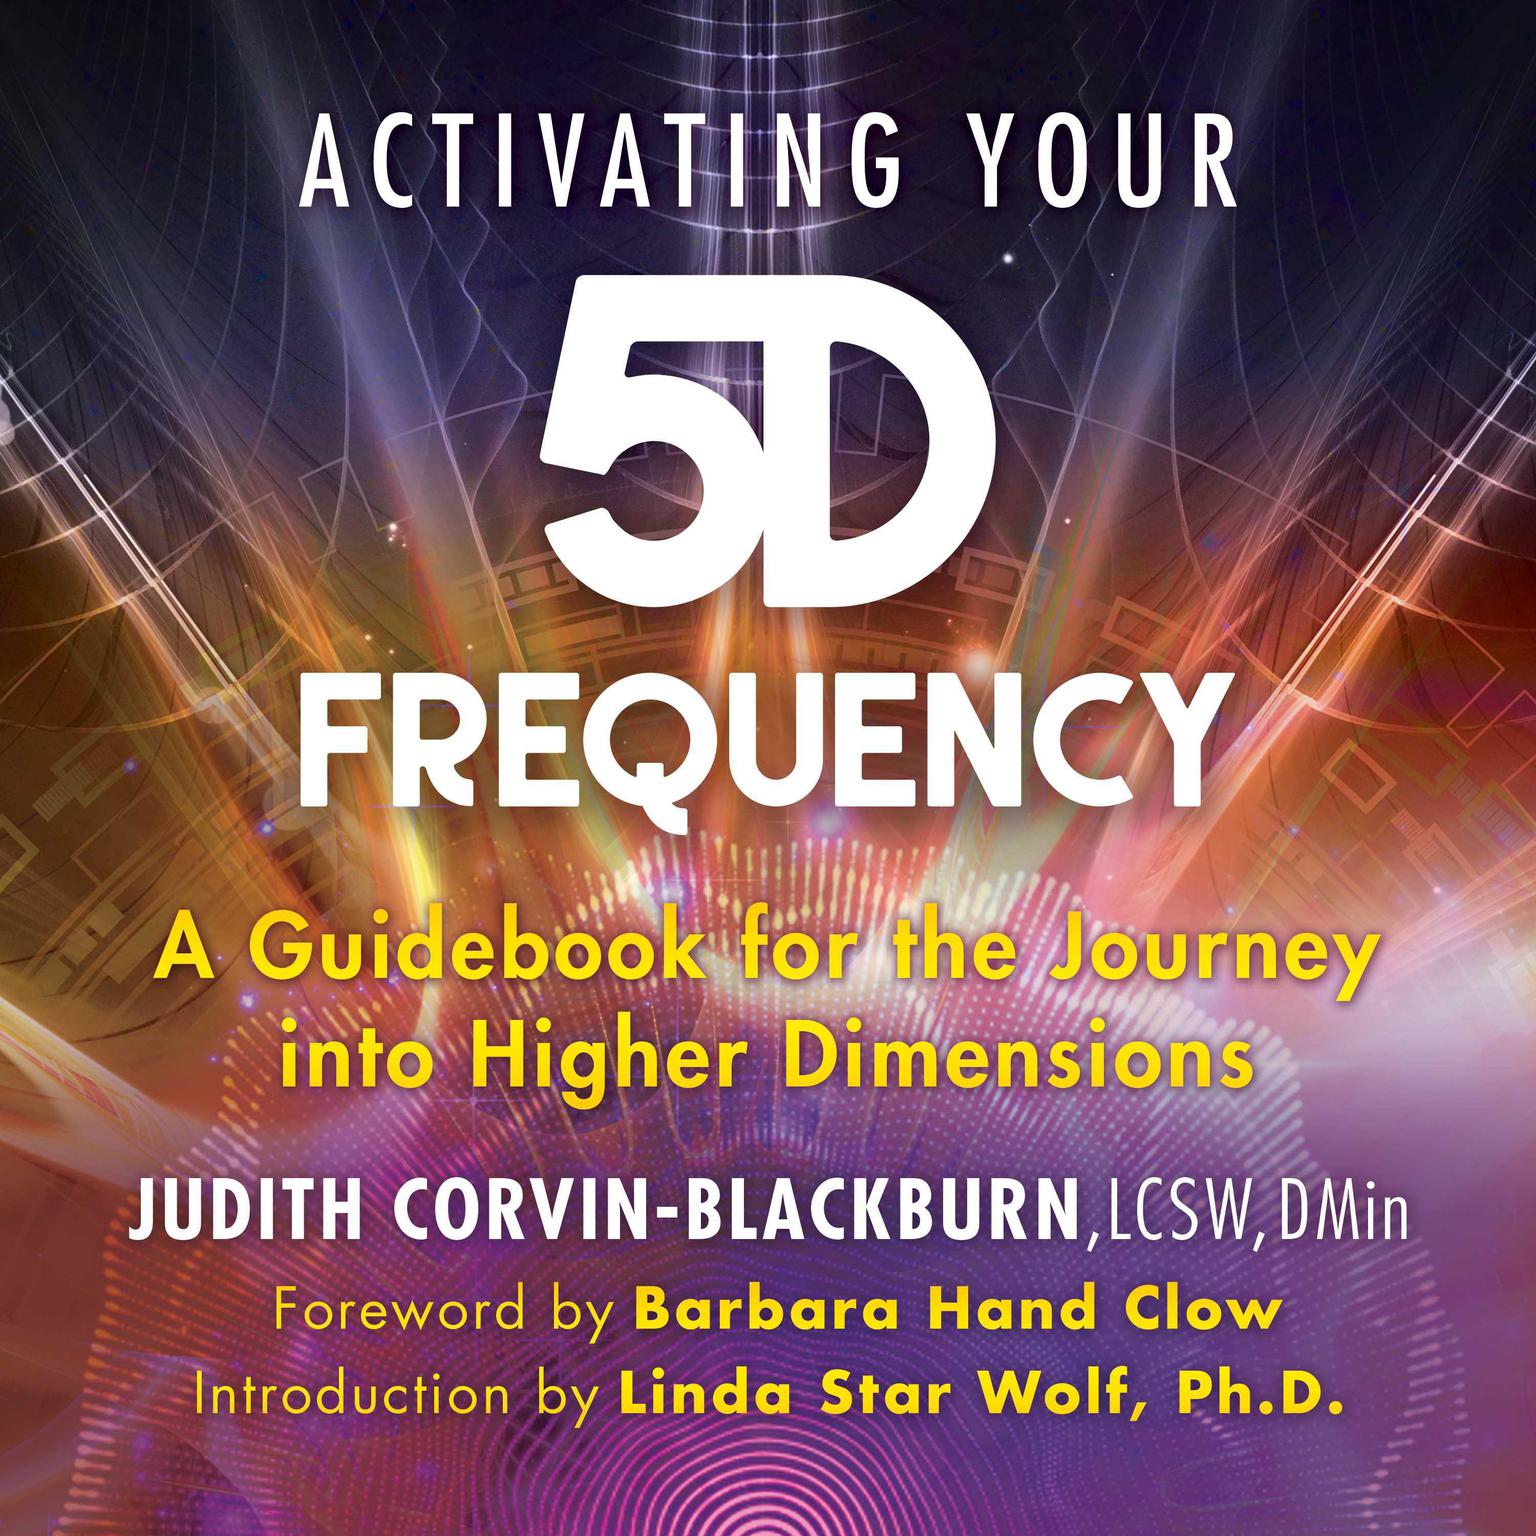 Activating Your 5D Frequency: A Guidebook for the Journey into Higher Dimensions Audiobook, by Judith Corvin-Blackburn